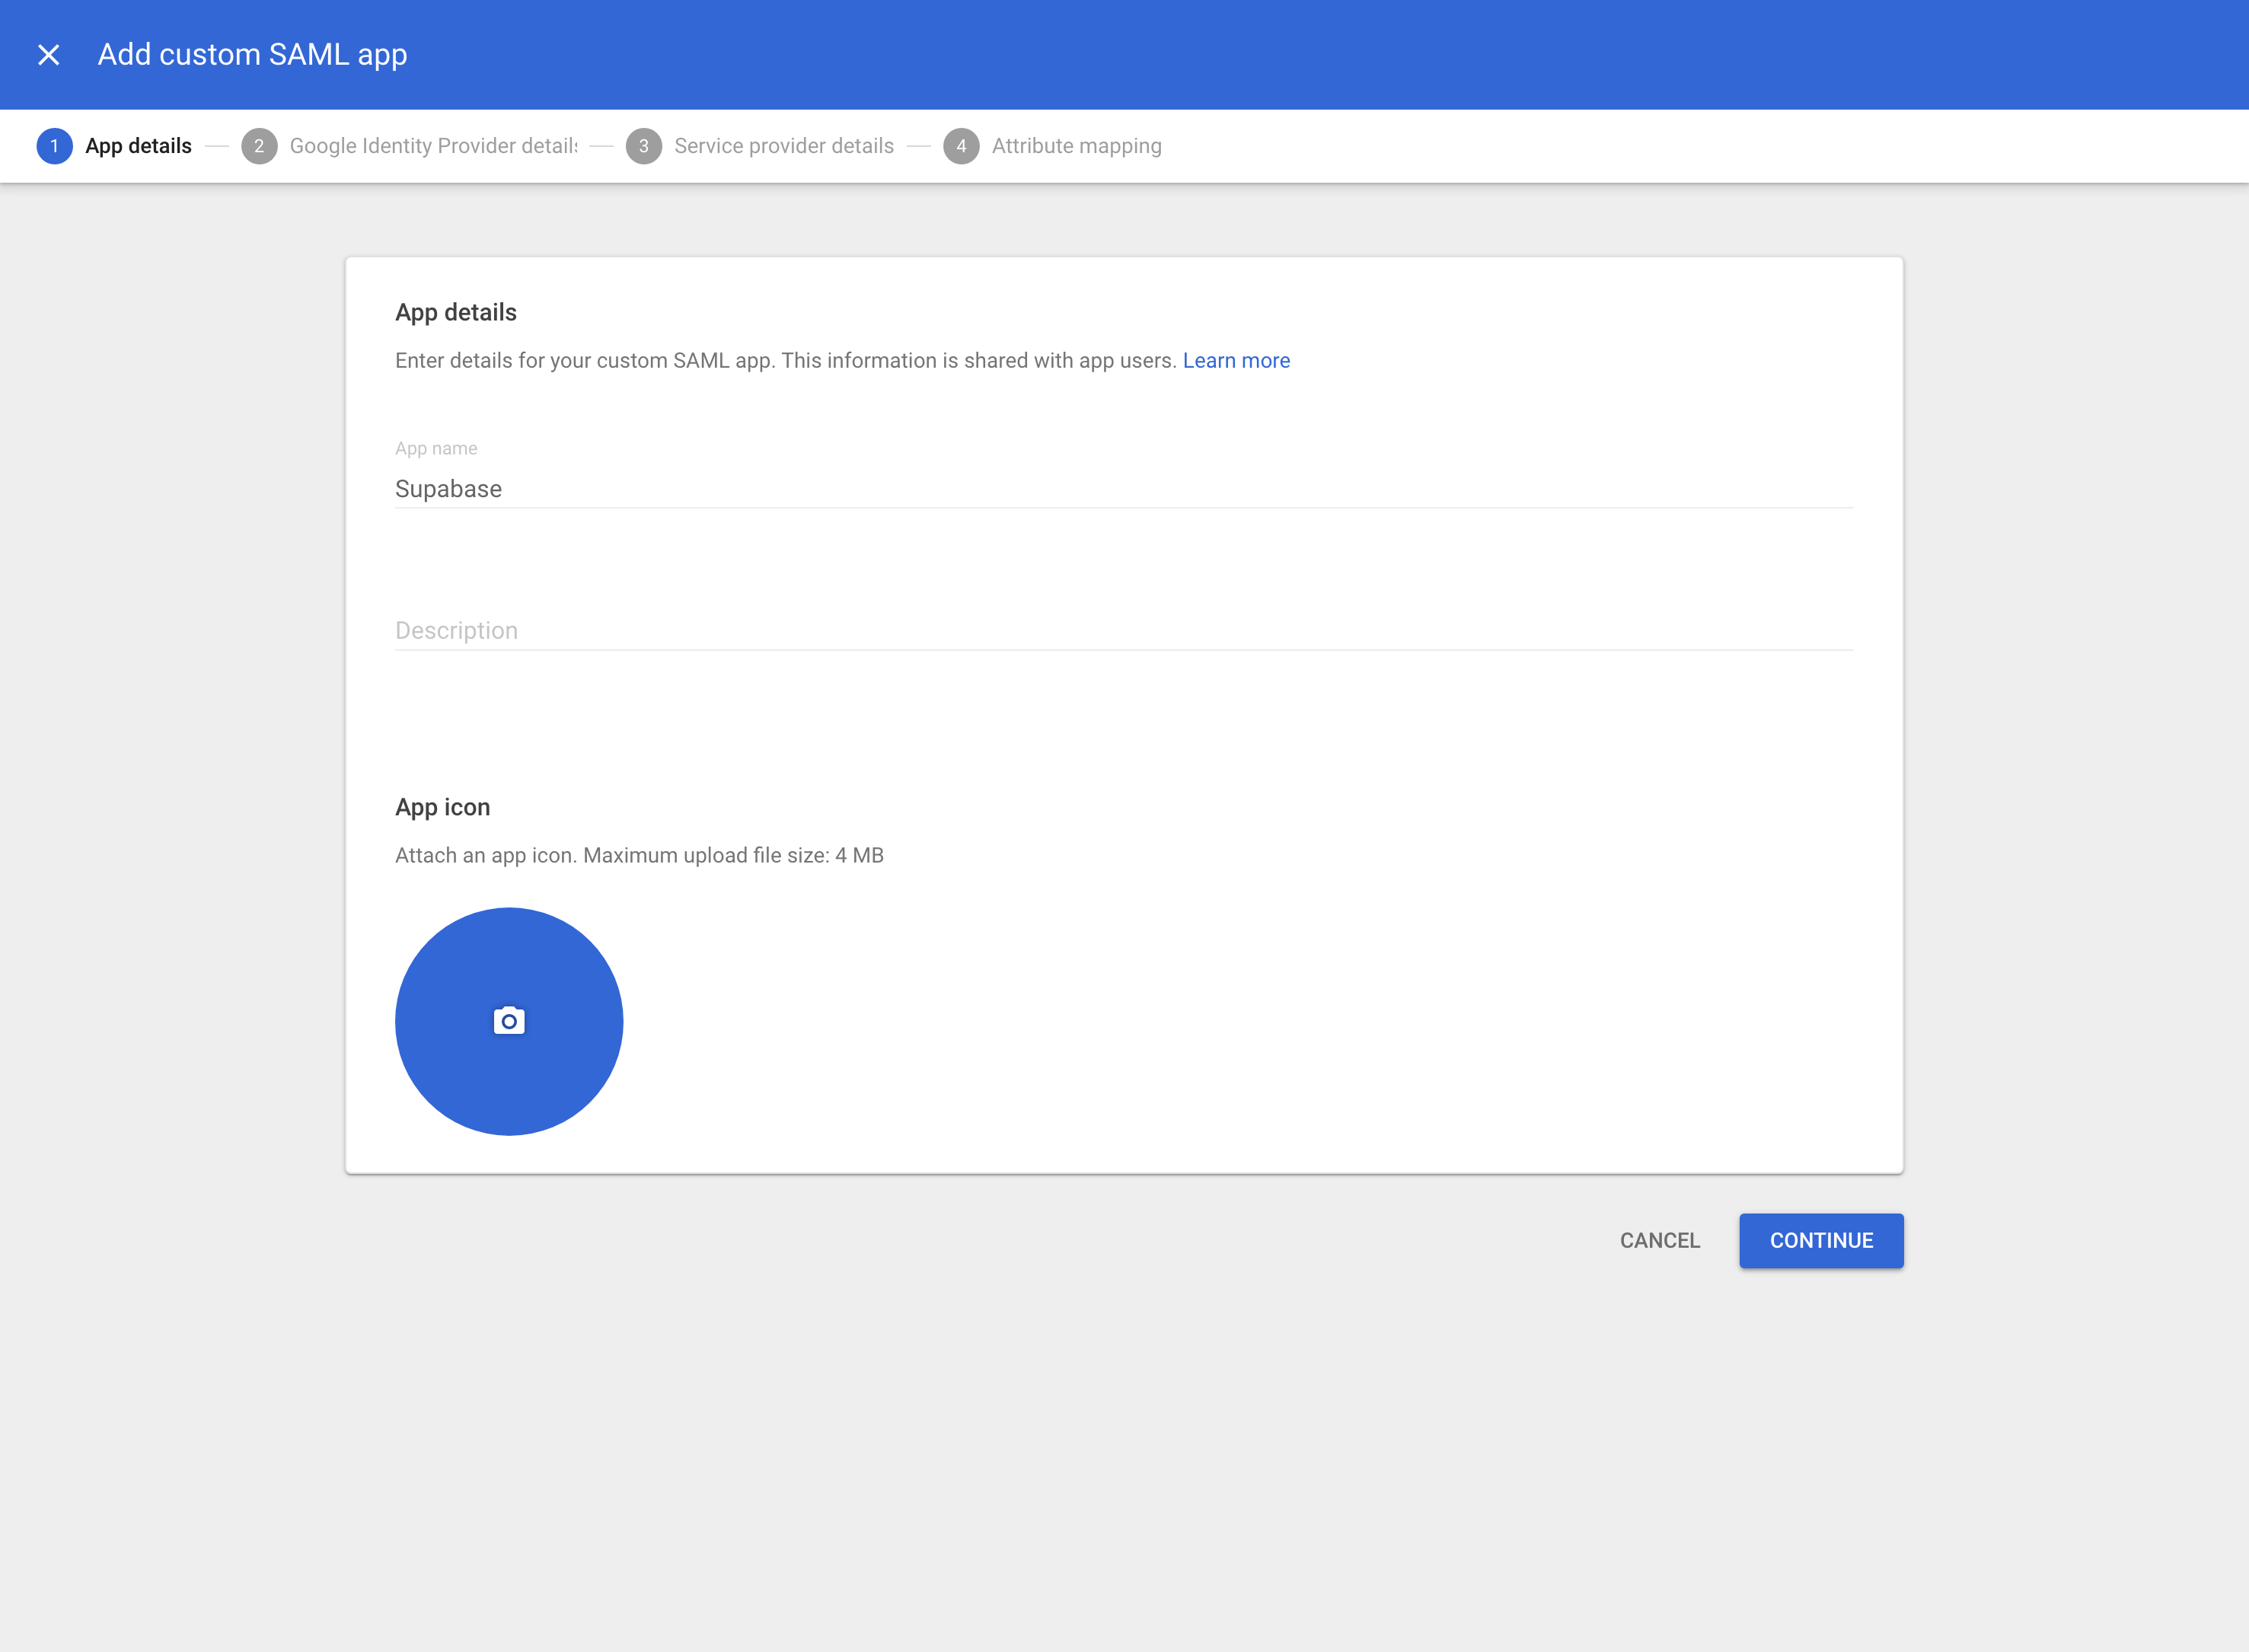 Google Workspace: Web and mobile apps admin console, Add custom SAML, App
details screen